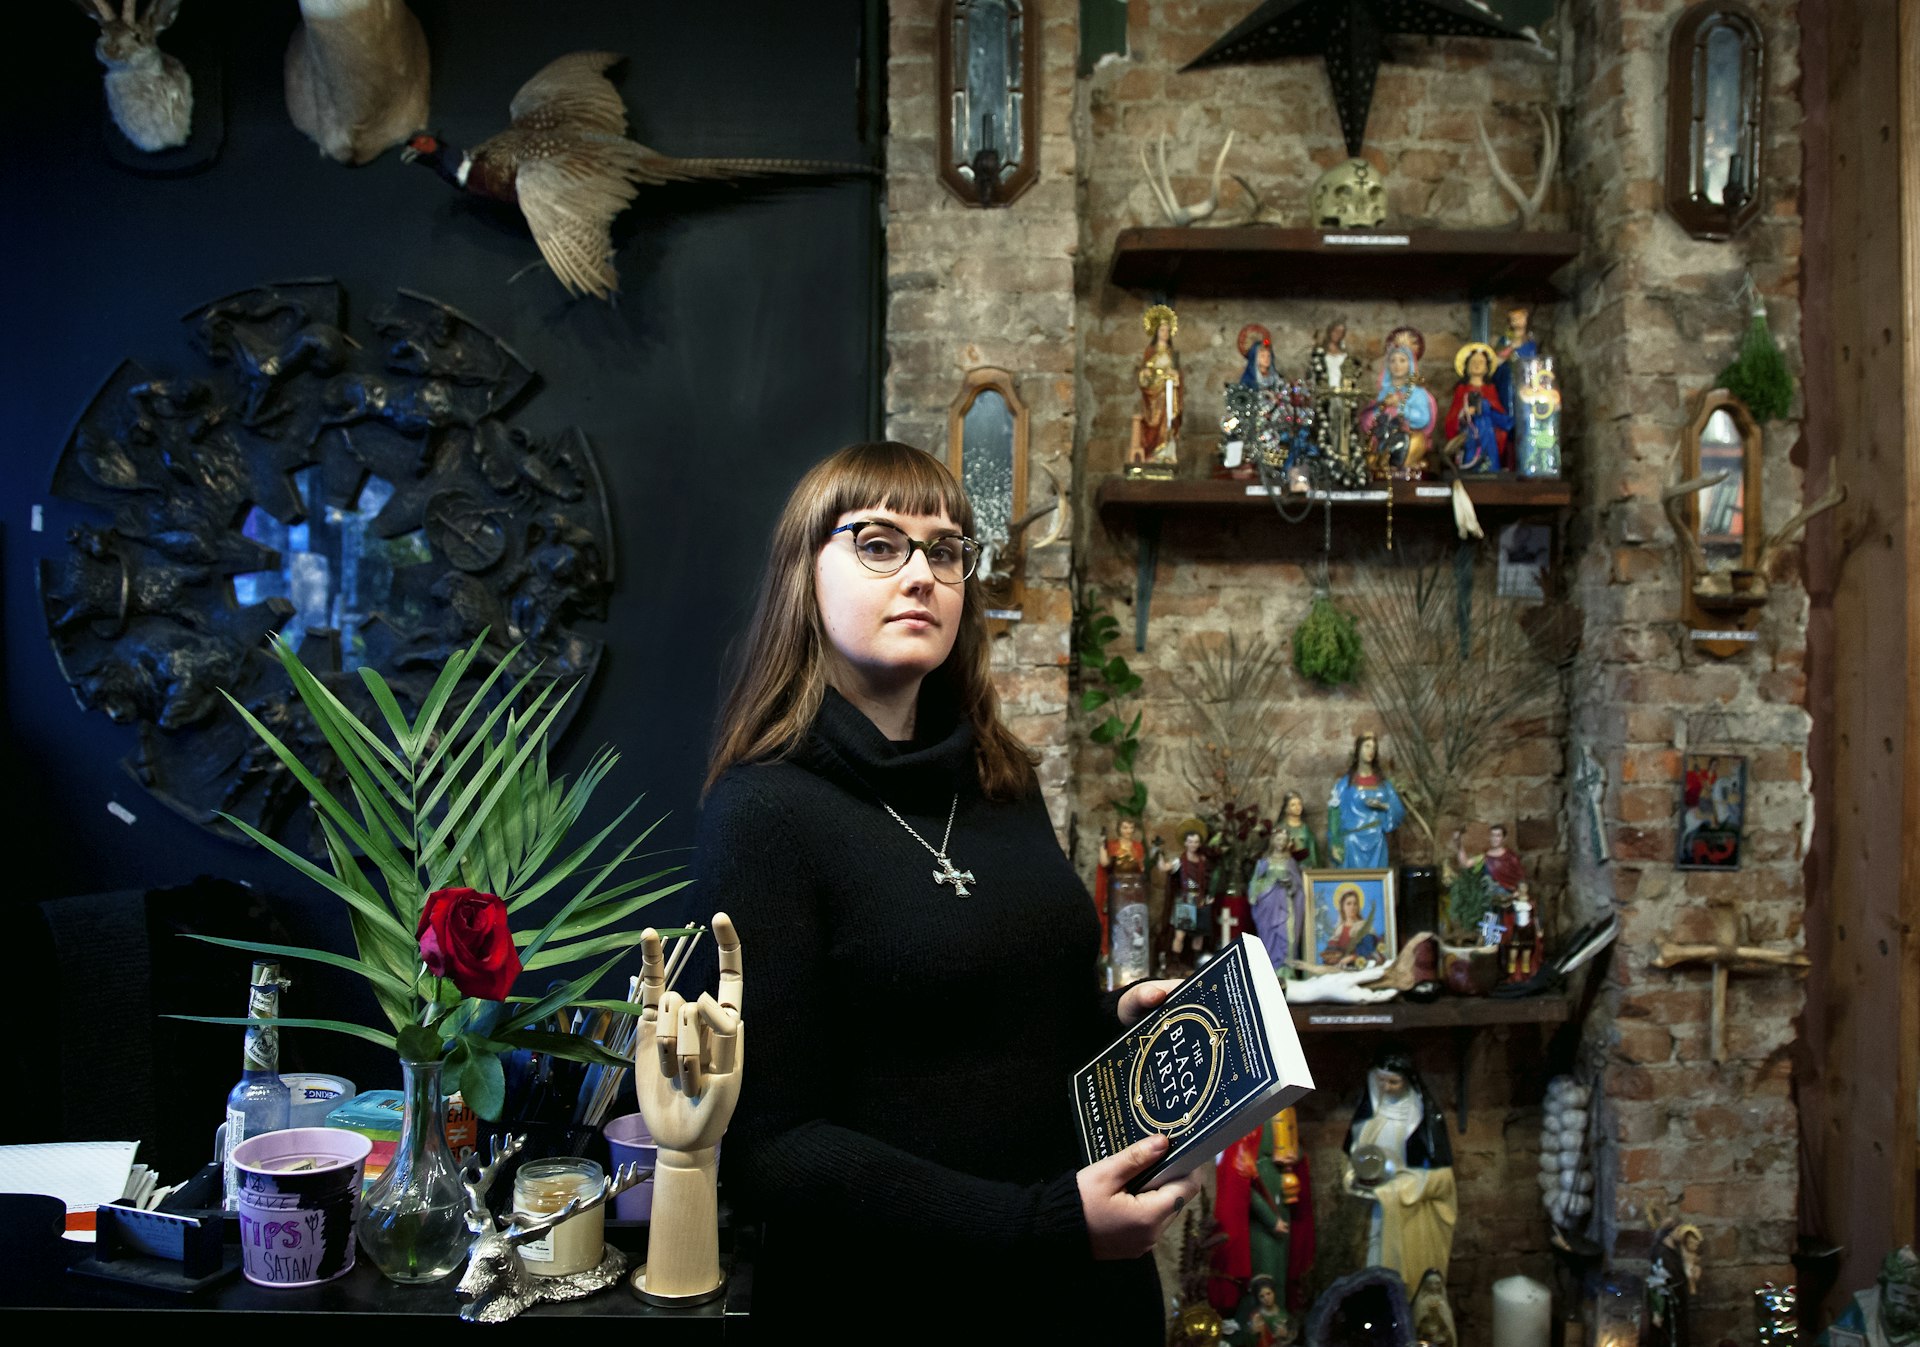 Melissa Madara, co-owner of Catland Books, is a folk witch, herbalist, and skilled scryer who performs readings aimed at finding practical solutions to life's questions